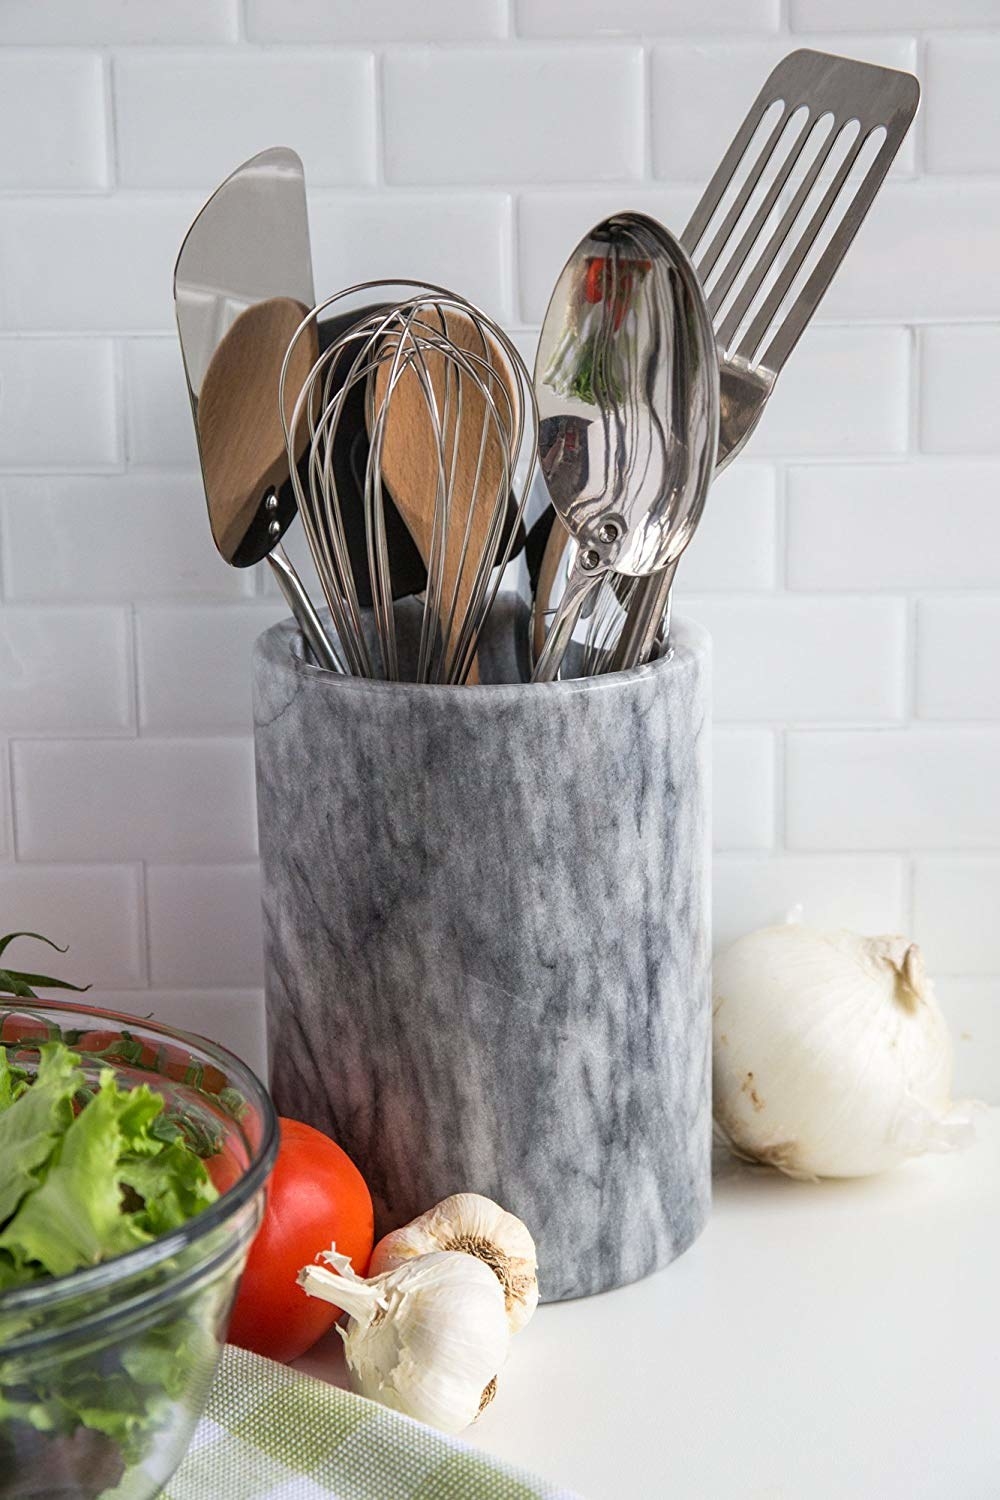 The marble option holding at least 7 large cooking utensils 